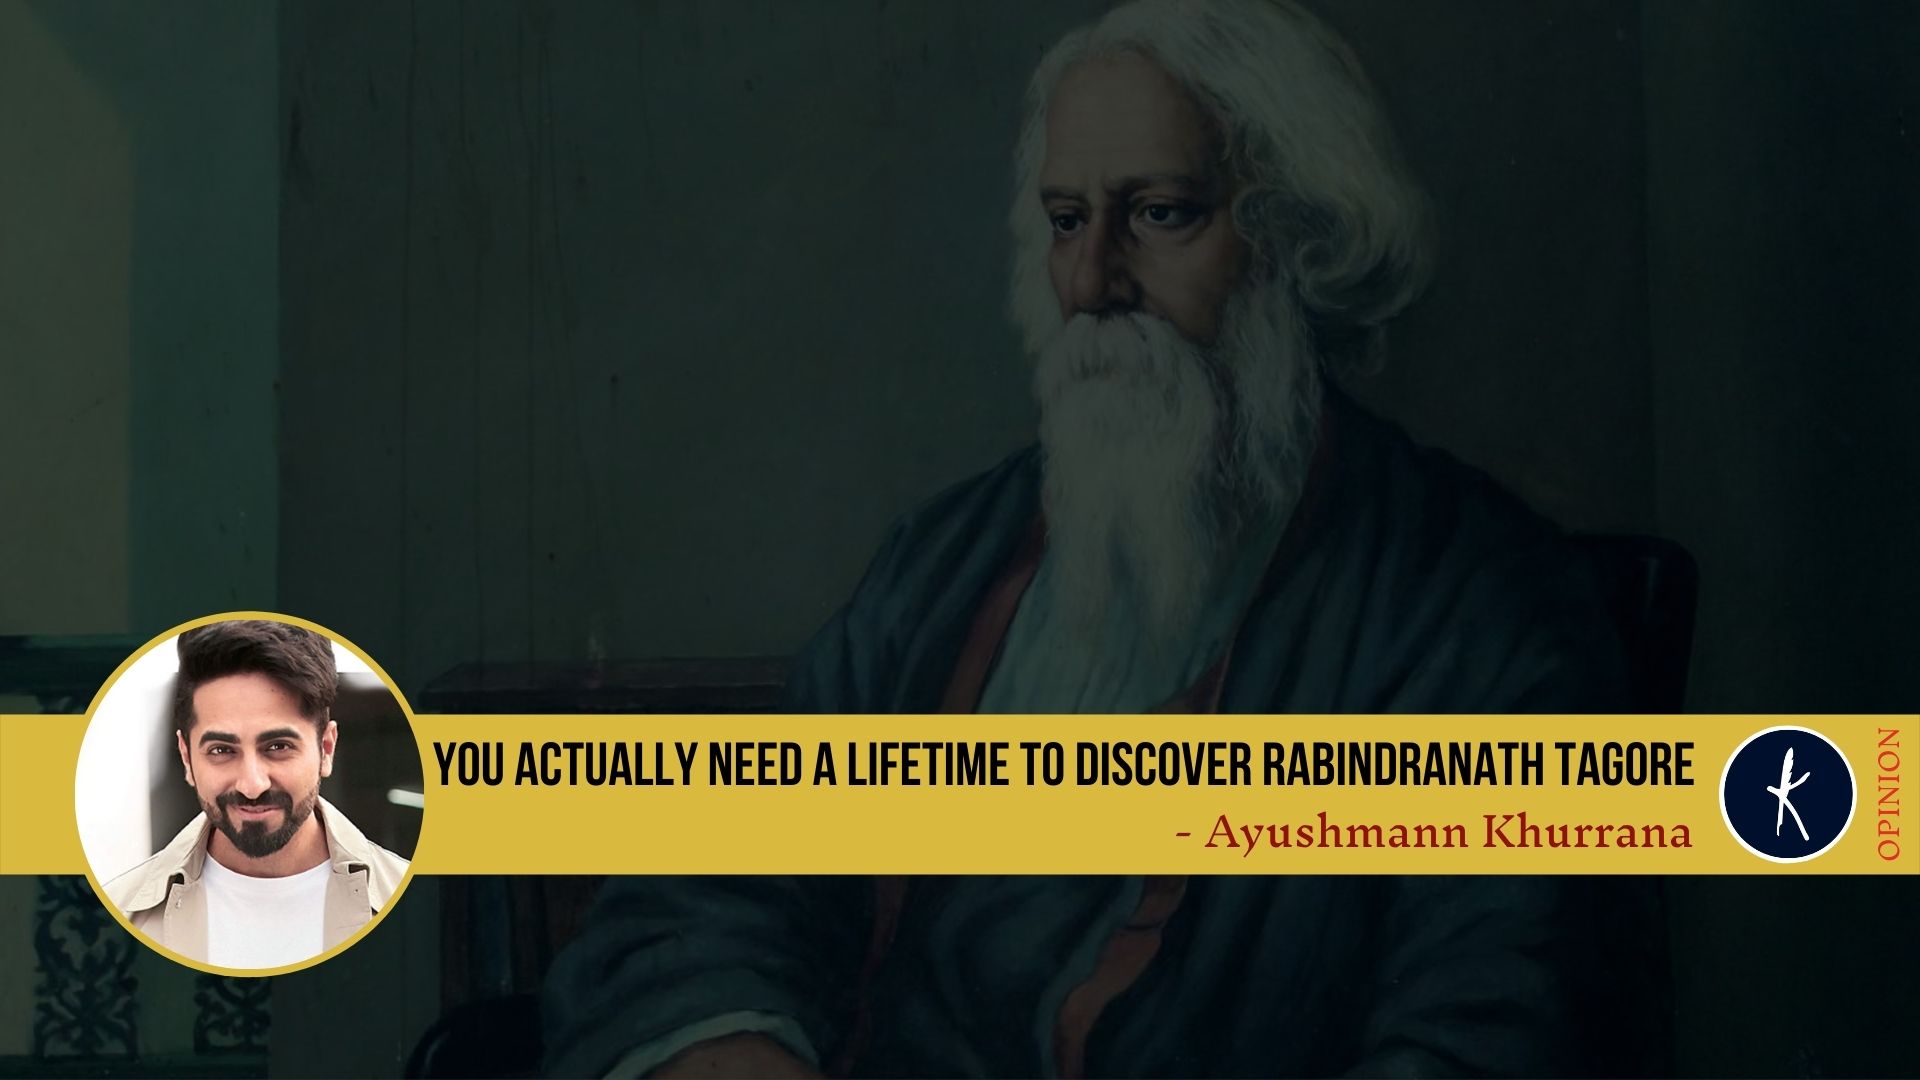 You actually need a lifetime to discover Rabindranath Tagore | Ayushmann Khurrana's image